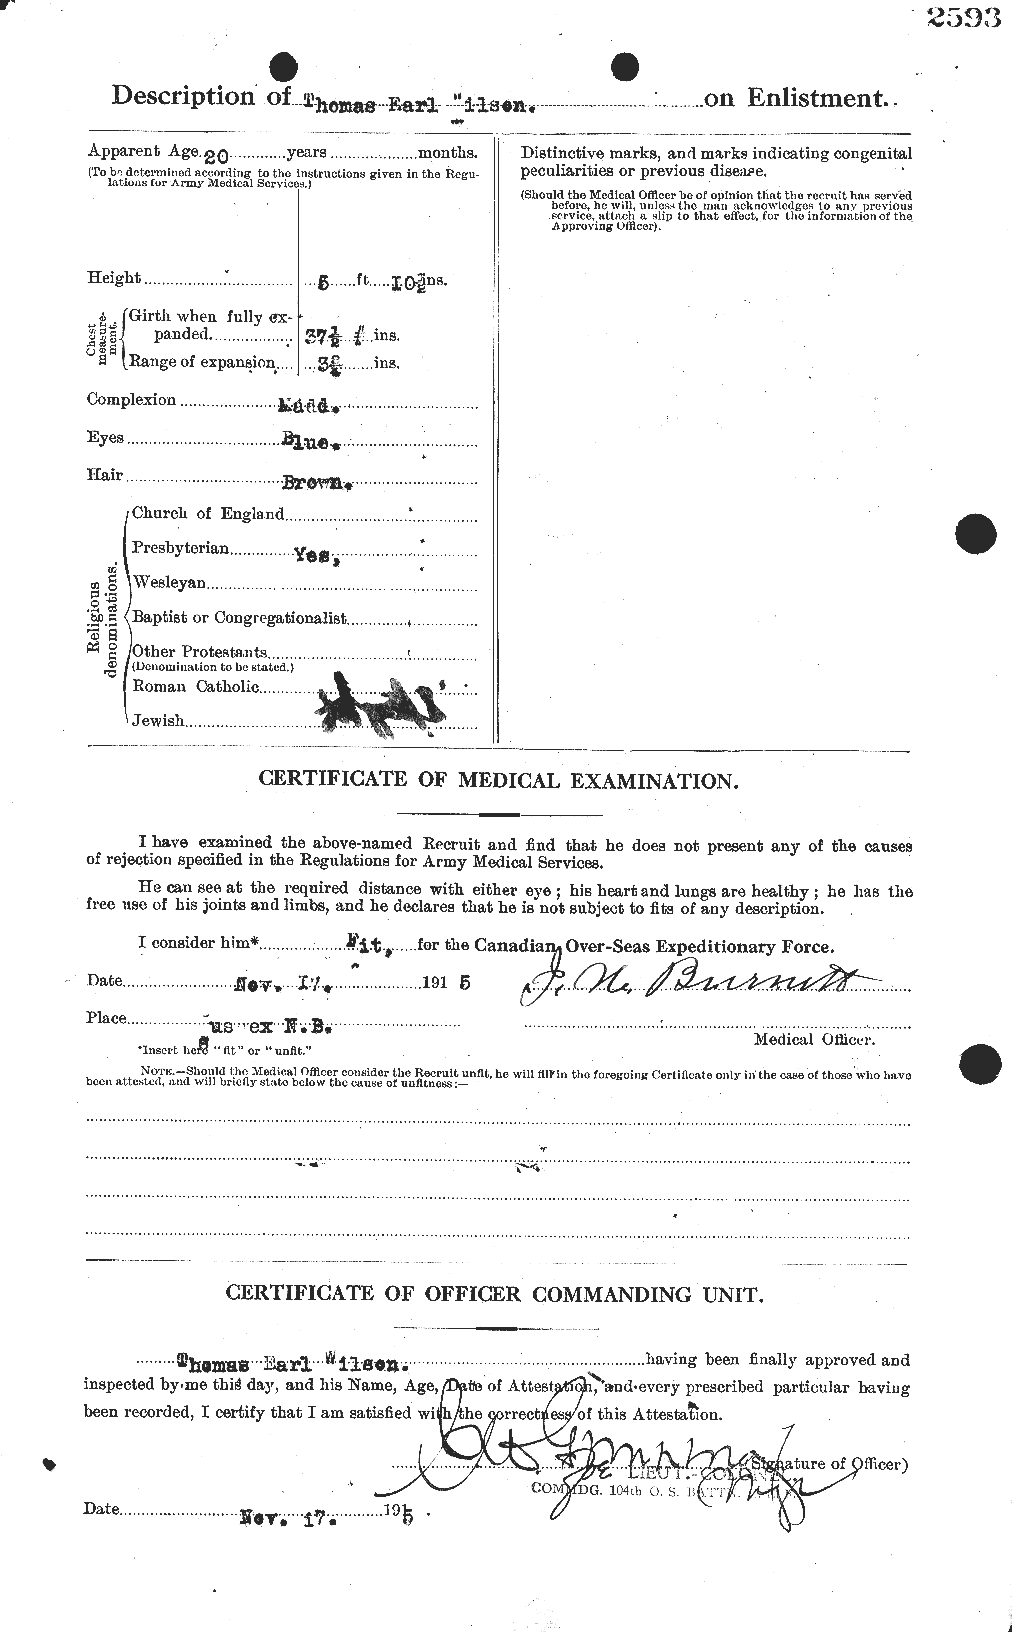 Personnel Records of the First World War - CEF 681250b